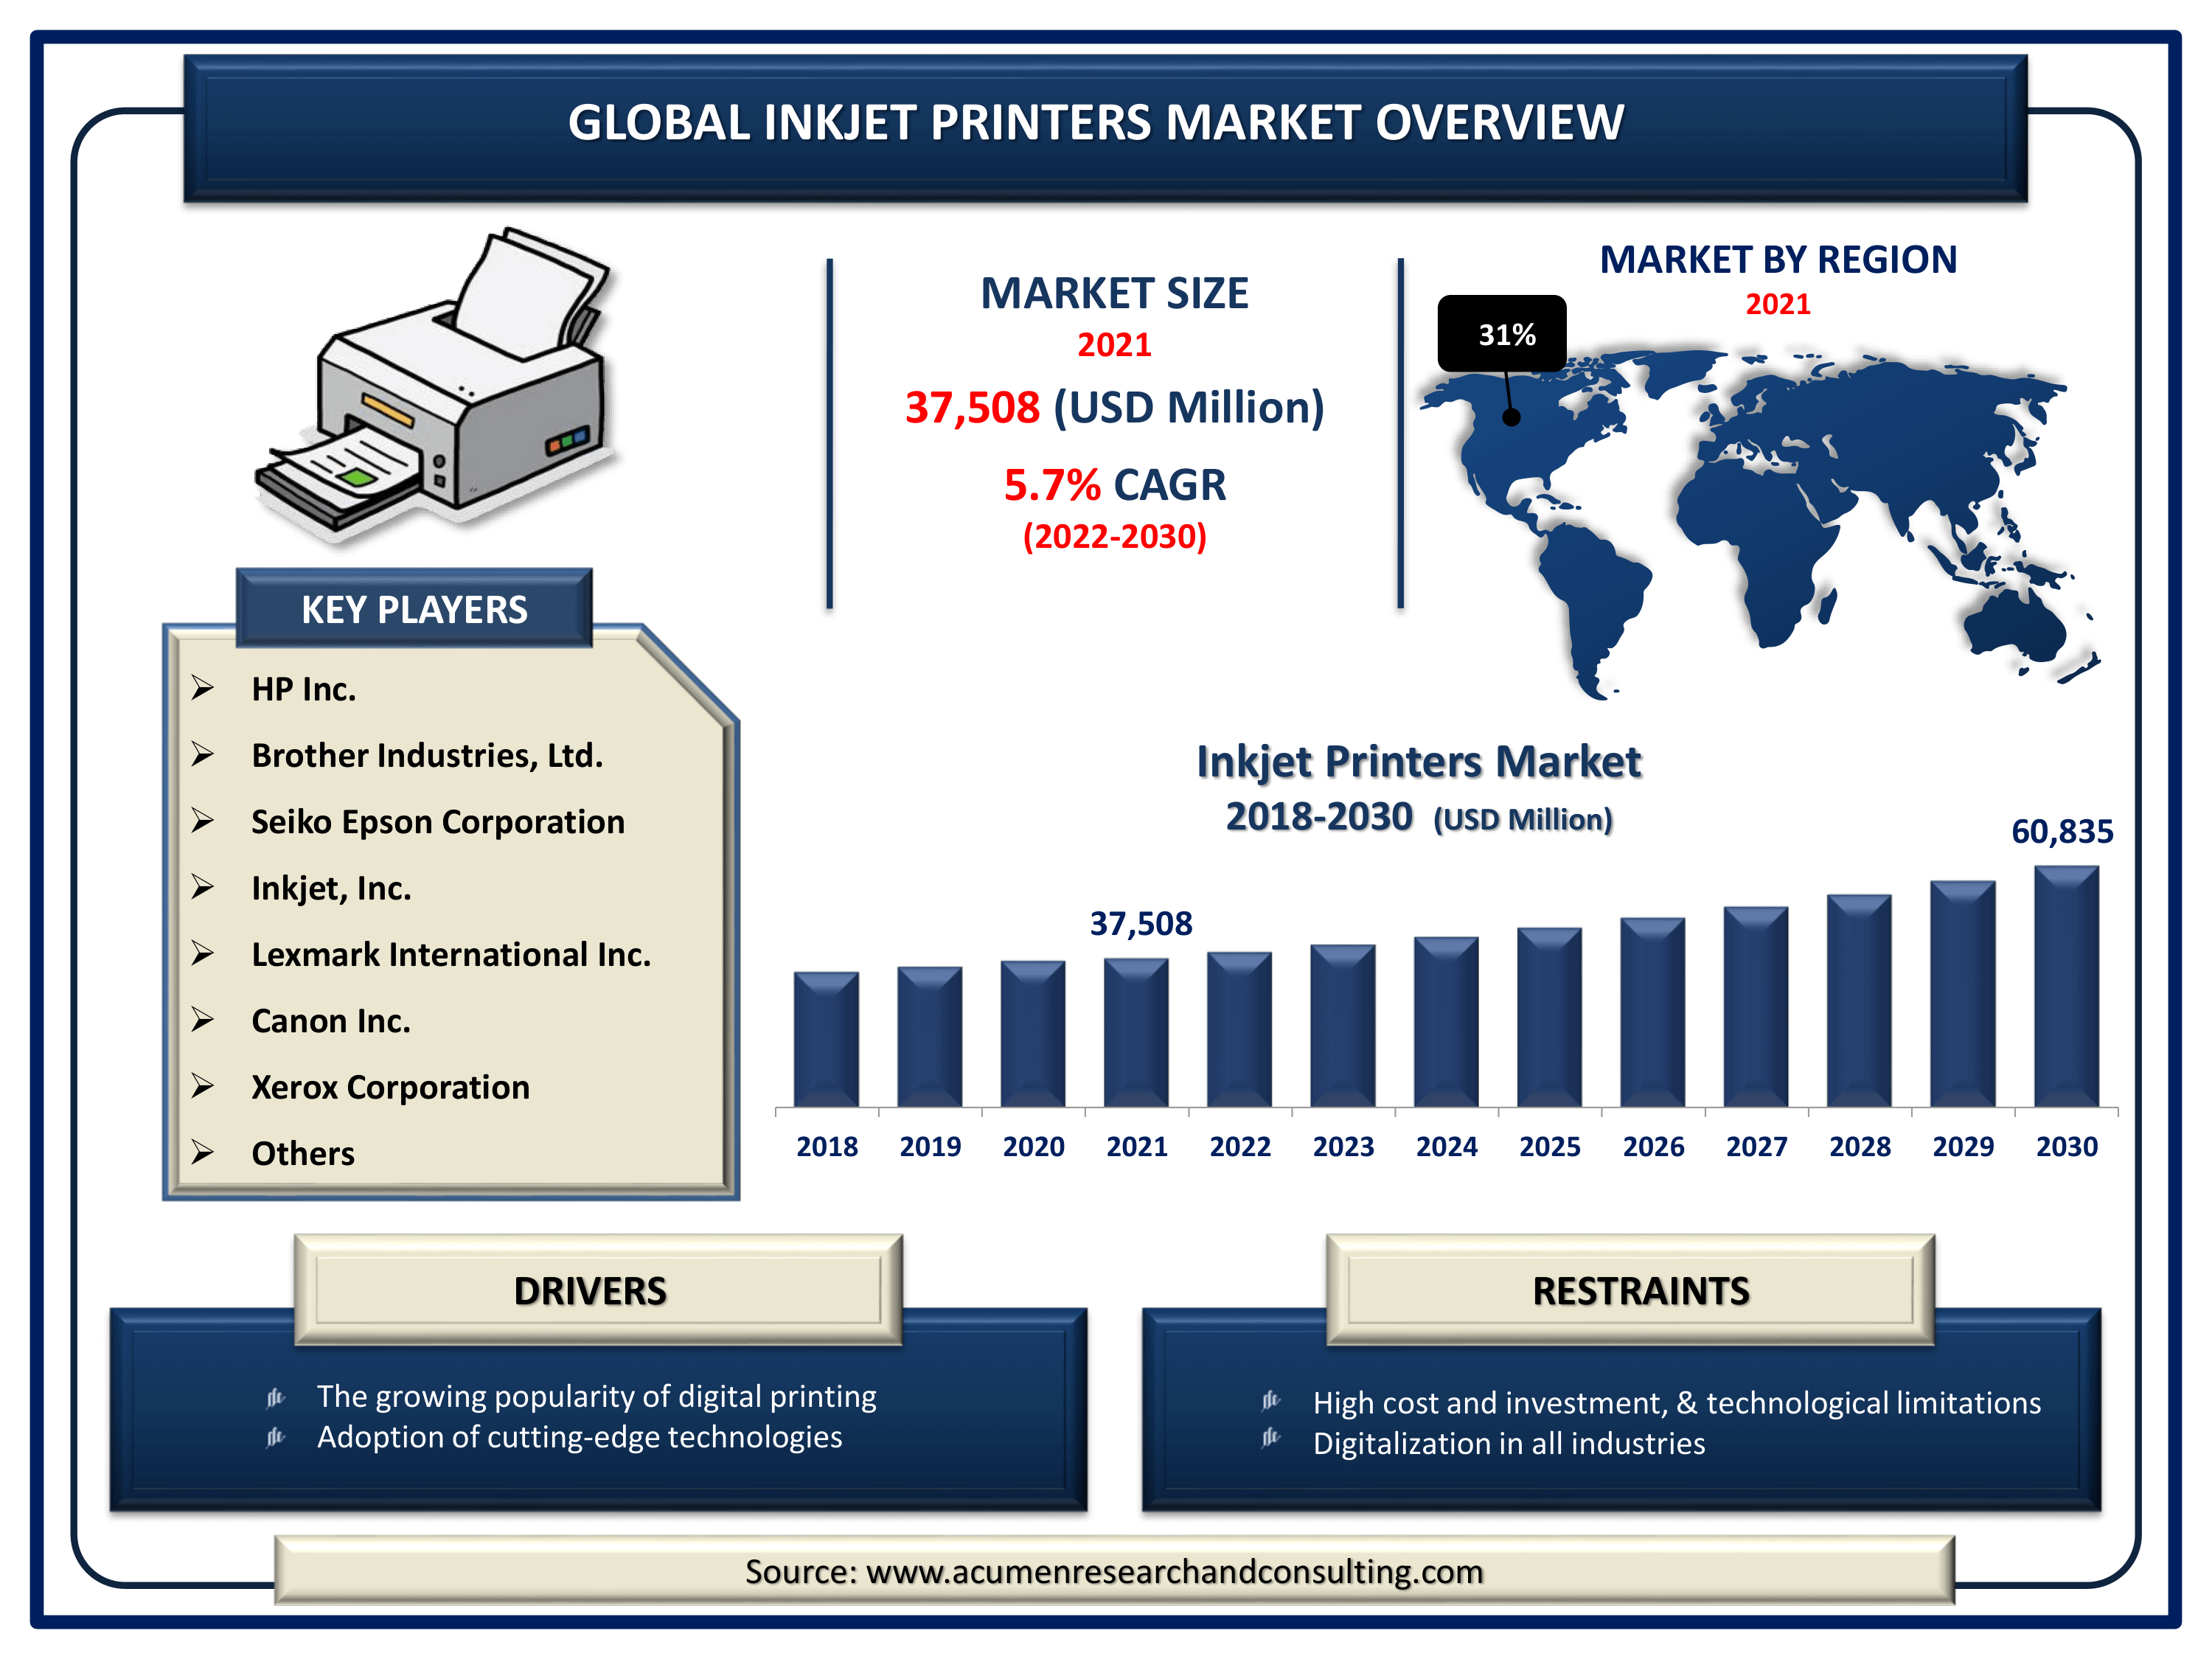 Global inkjet printers market revenue intended to gain USD 60,835 million by 2030 with a CAGR of 5.7% from 2022 to 2030